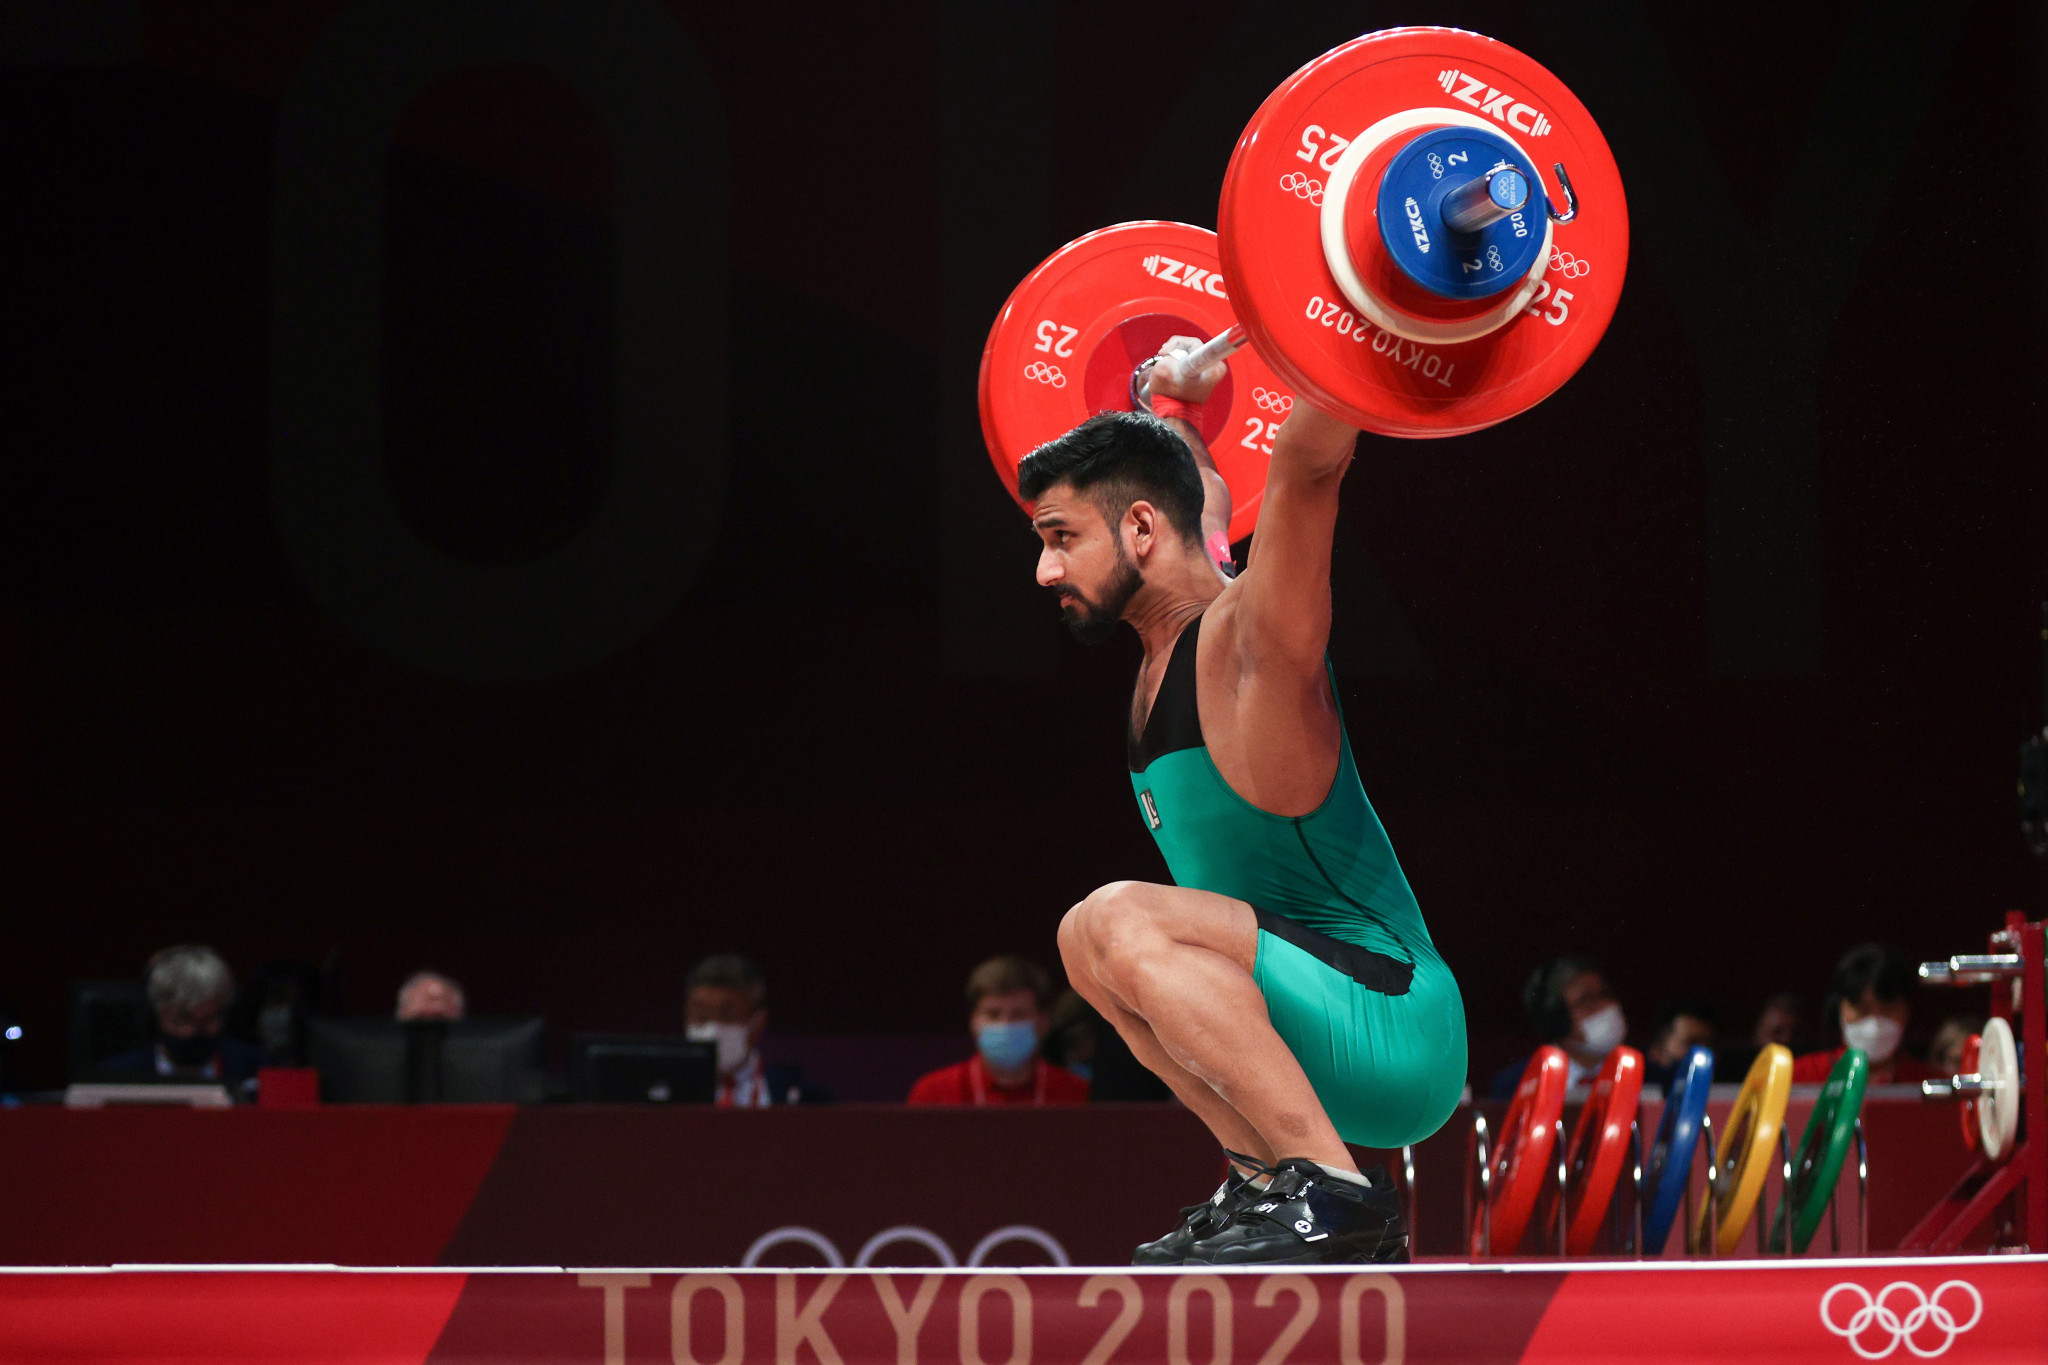 Talha Talib, who competed at the Tokyo 2020 Olympics, will lift in the Weightlifting Commonwealth Championships in Tashkent ©Getty Images